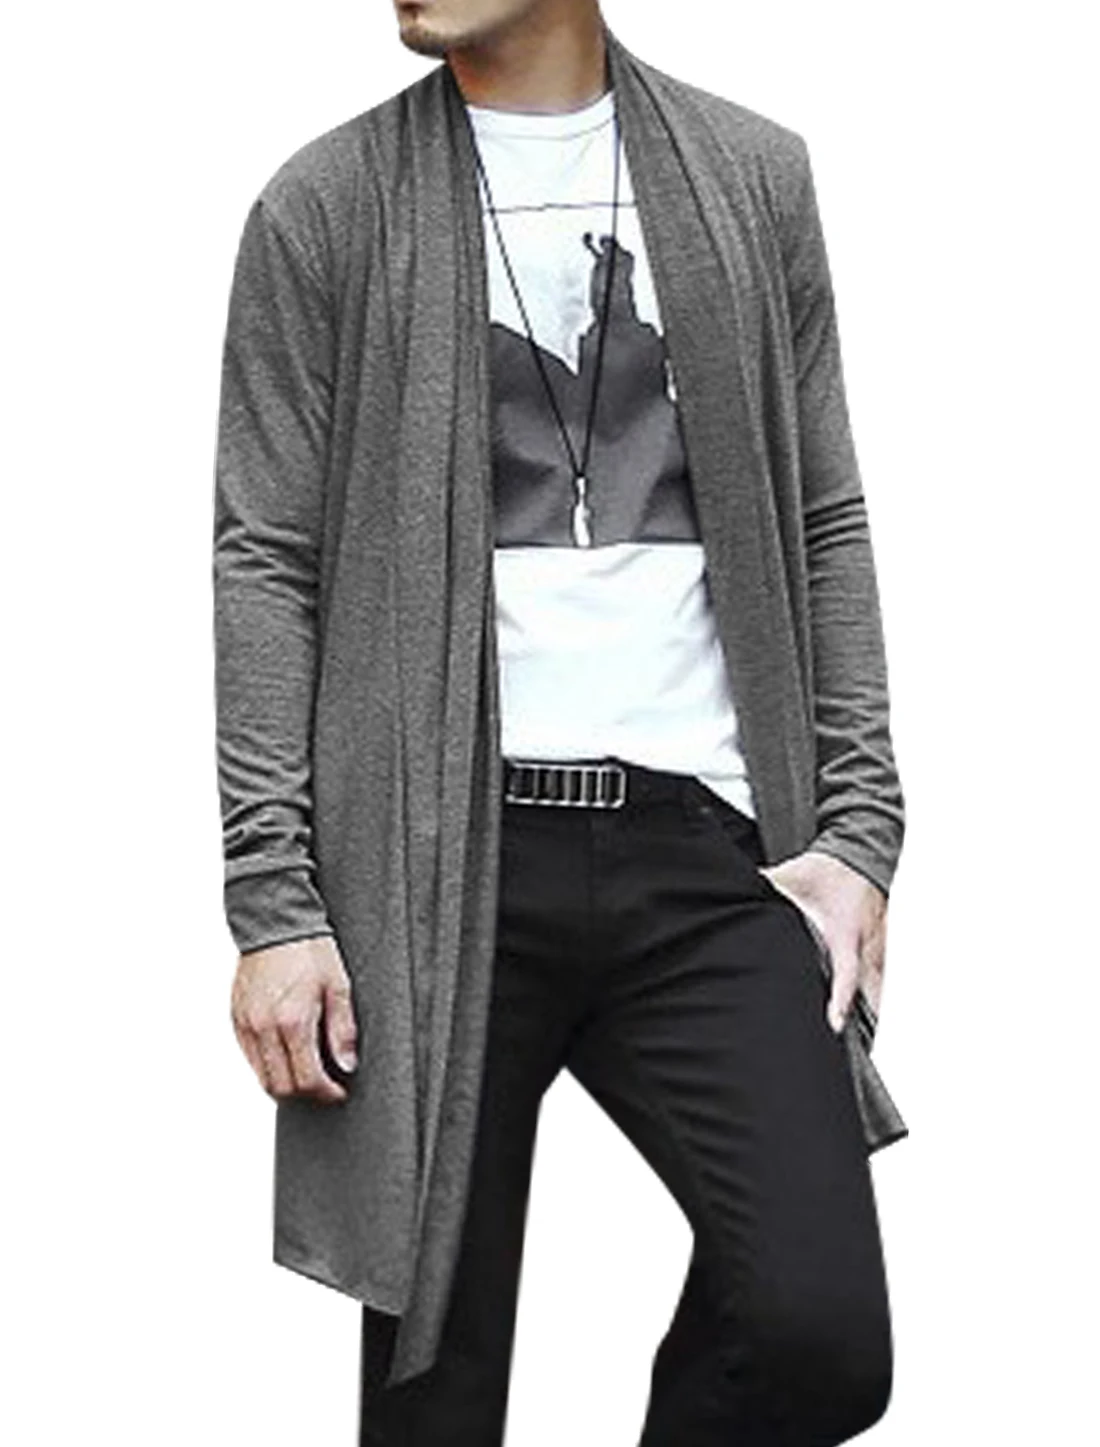 Online for womens long cardigan sweater with hoodie men cheap near